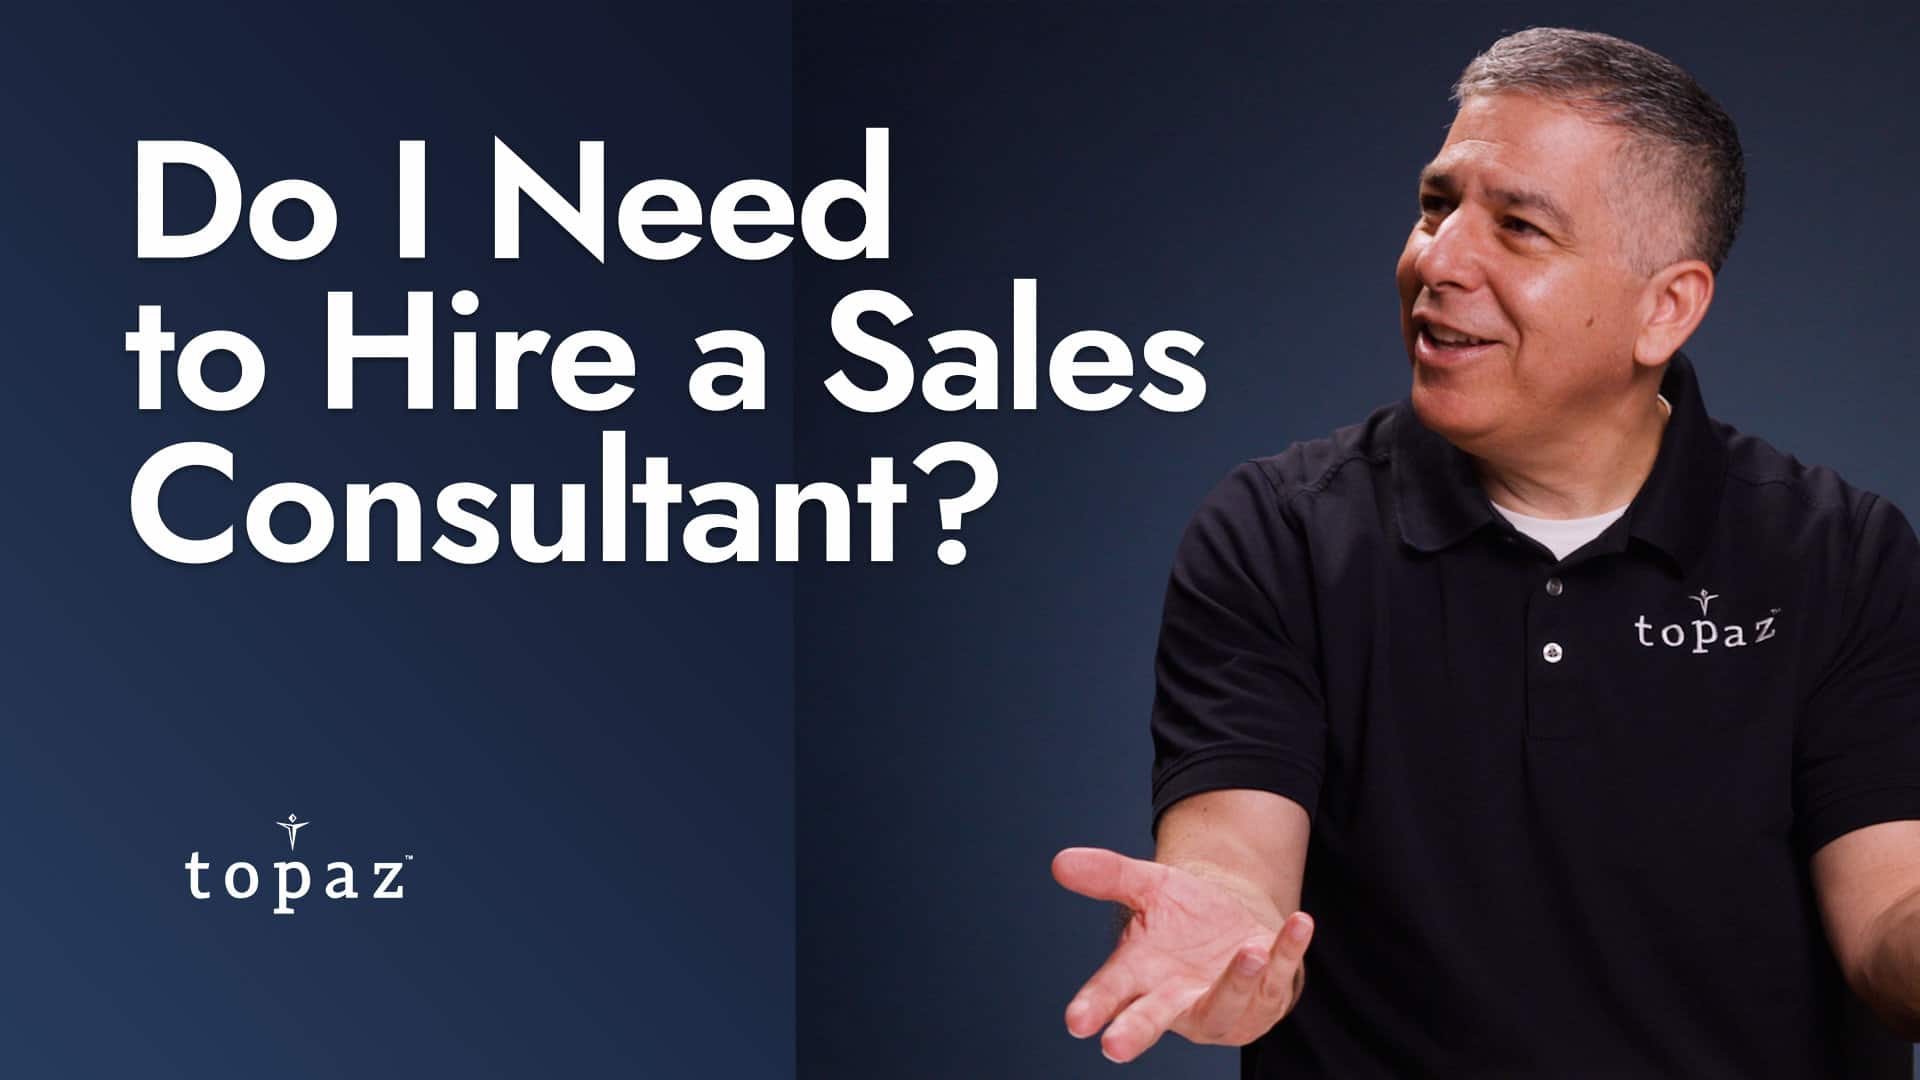 Video: Do I Need to Hire a Sales Consultant